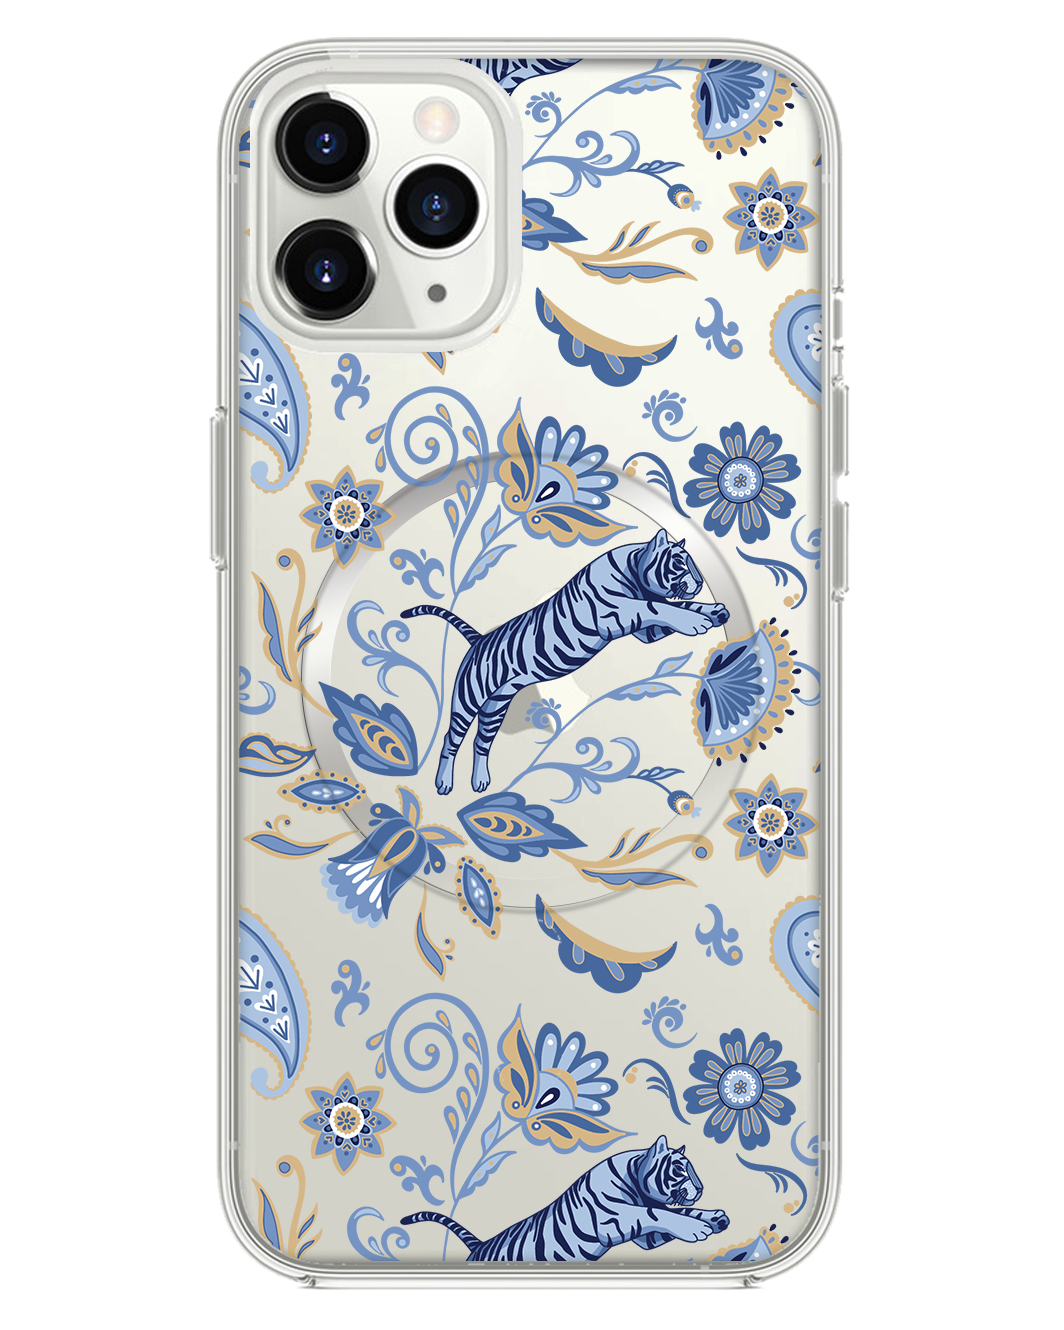 iPhone Rearguard Hybrid - Tiger & Florals